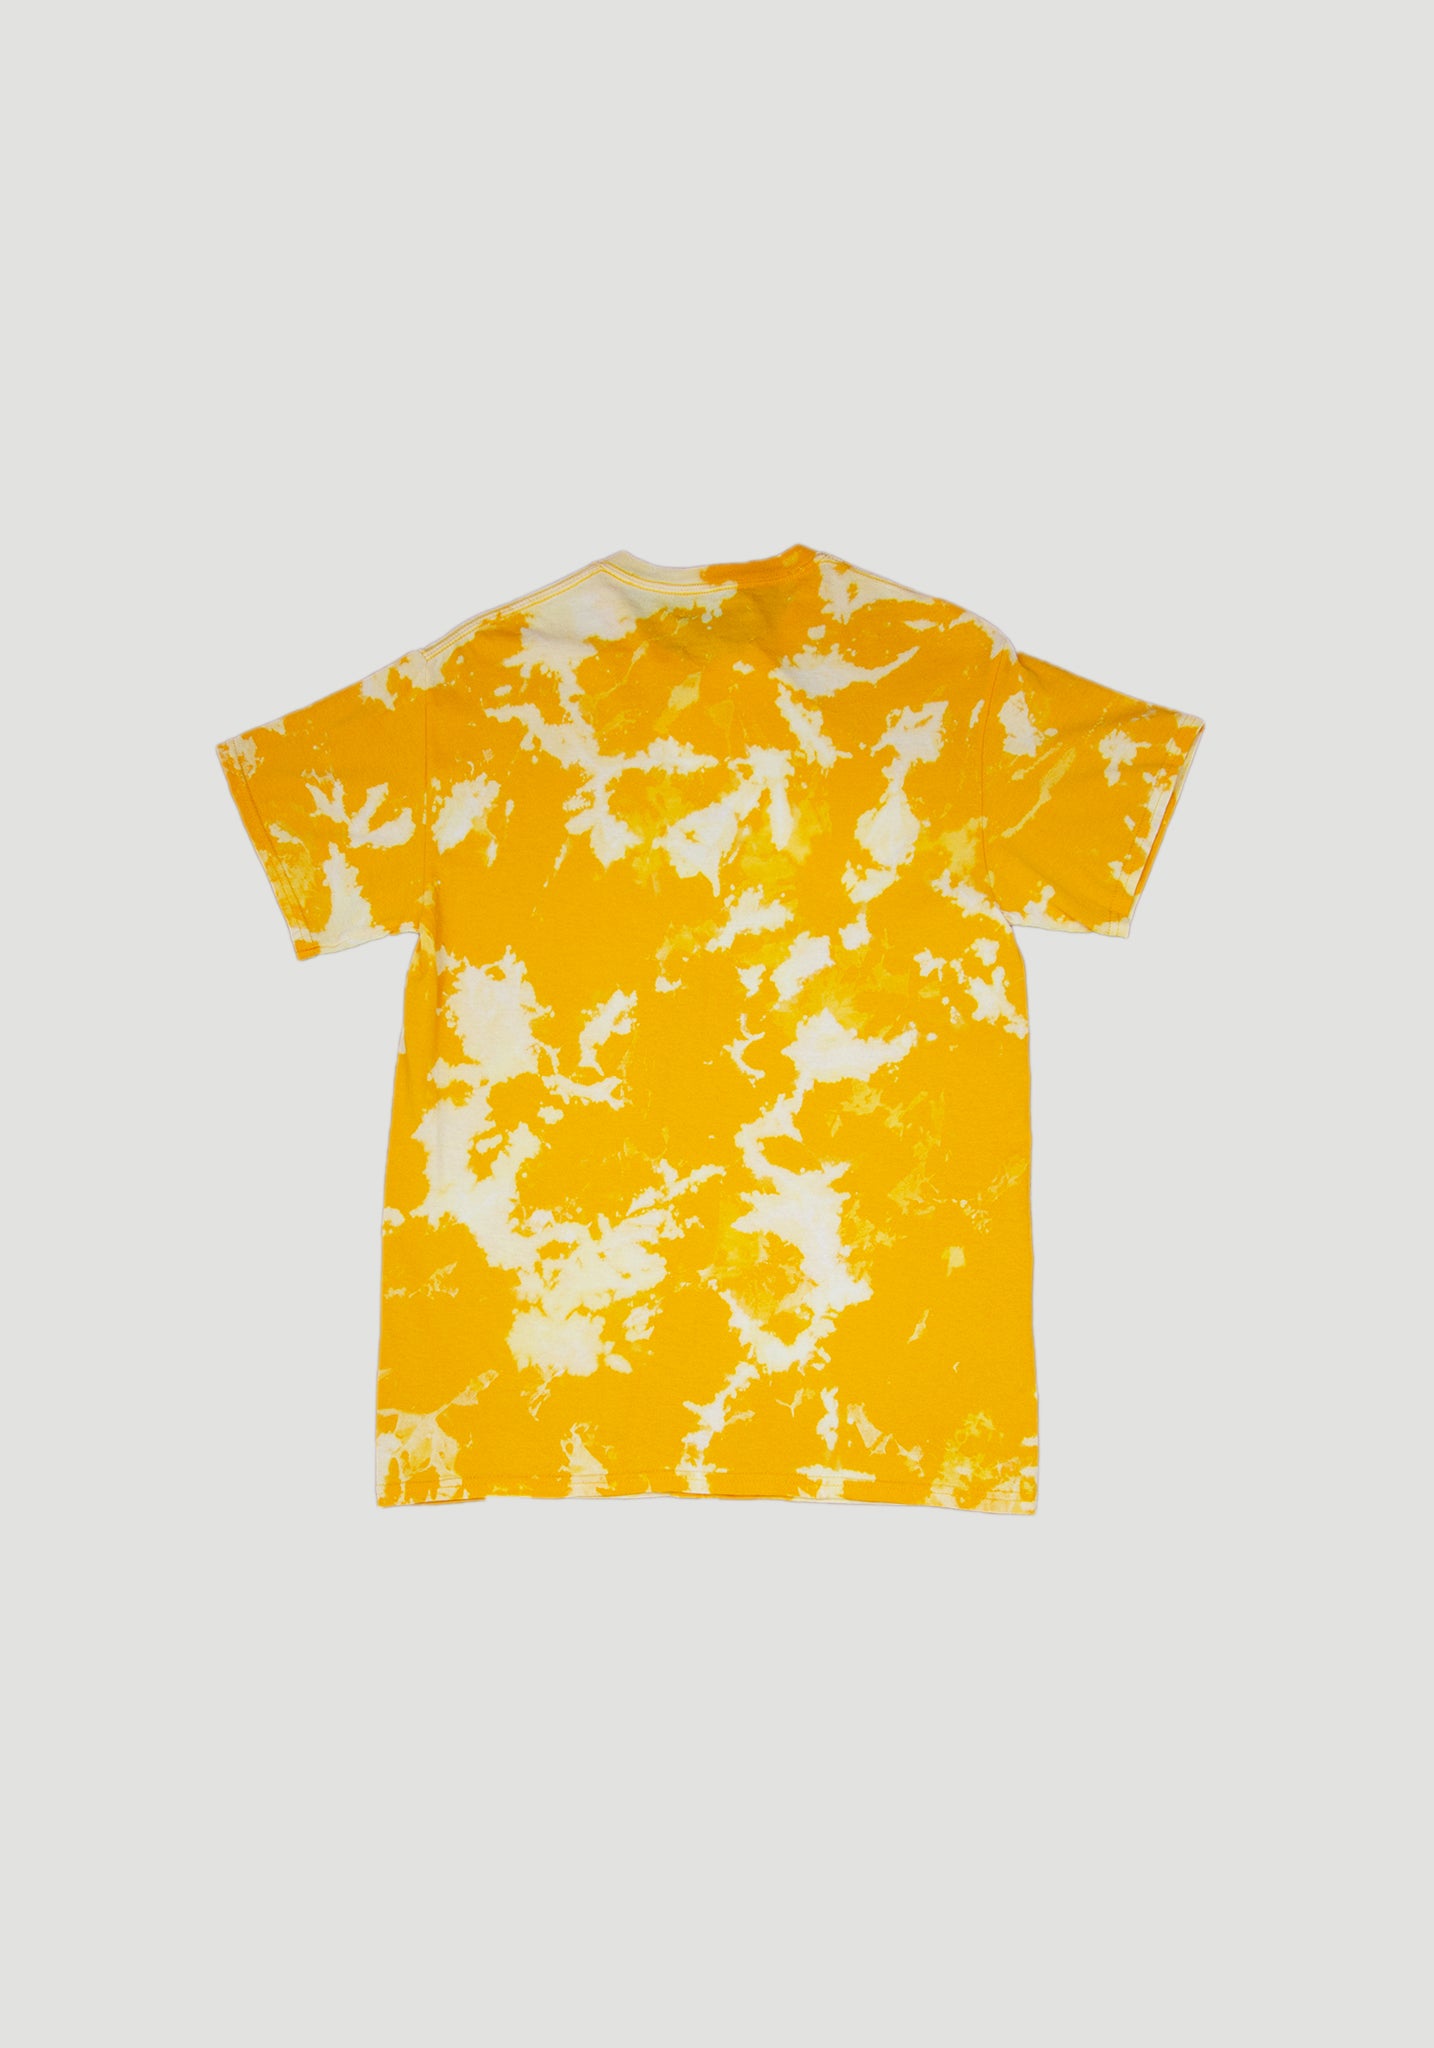 HDL Shirt Sunkissed Edition #06 (M)